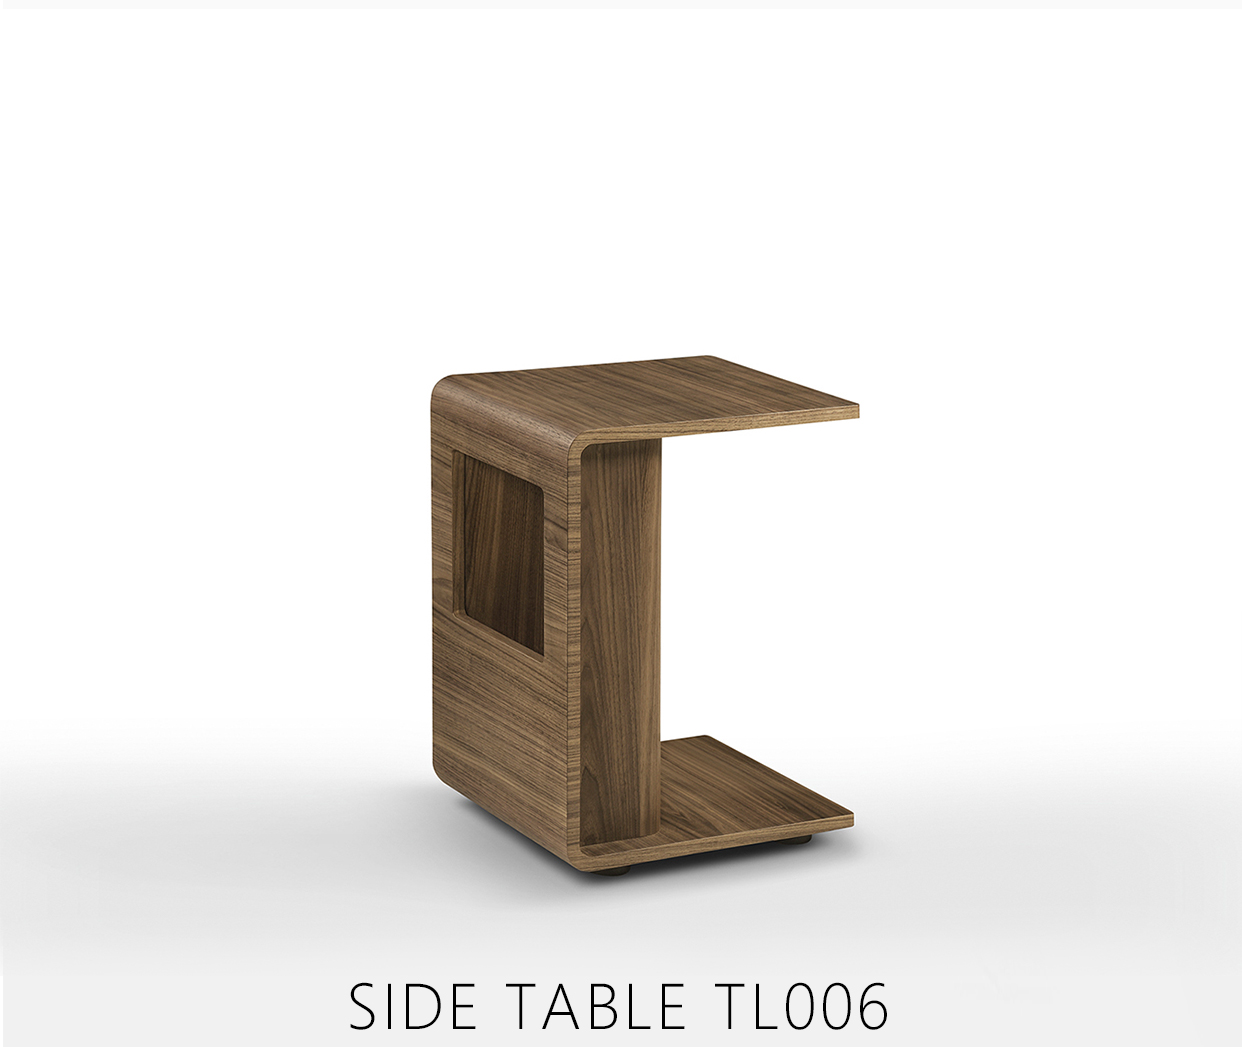 SIDE TABLE TL006